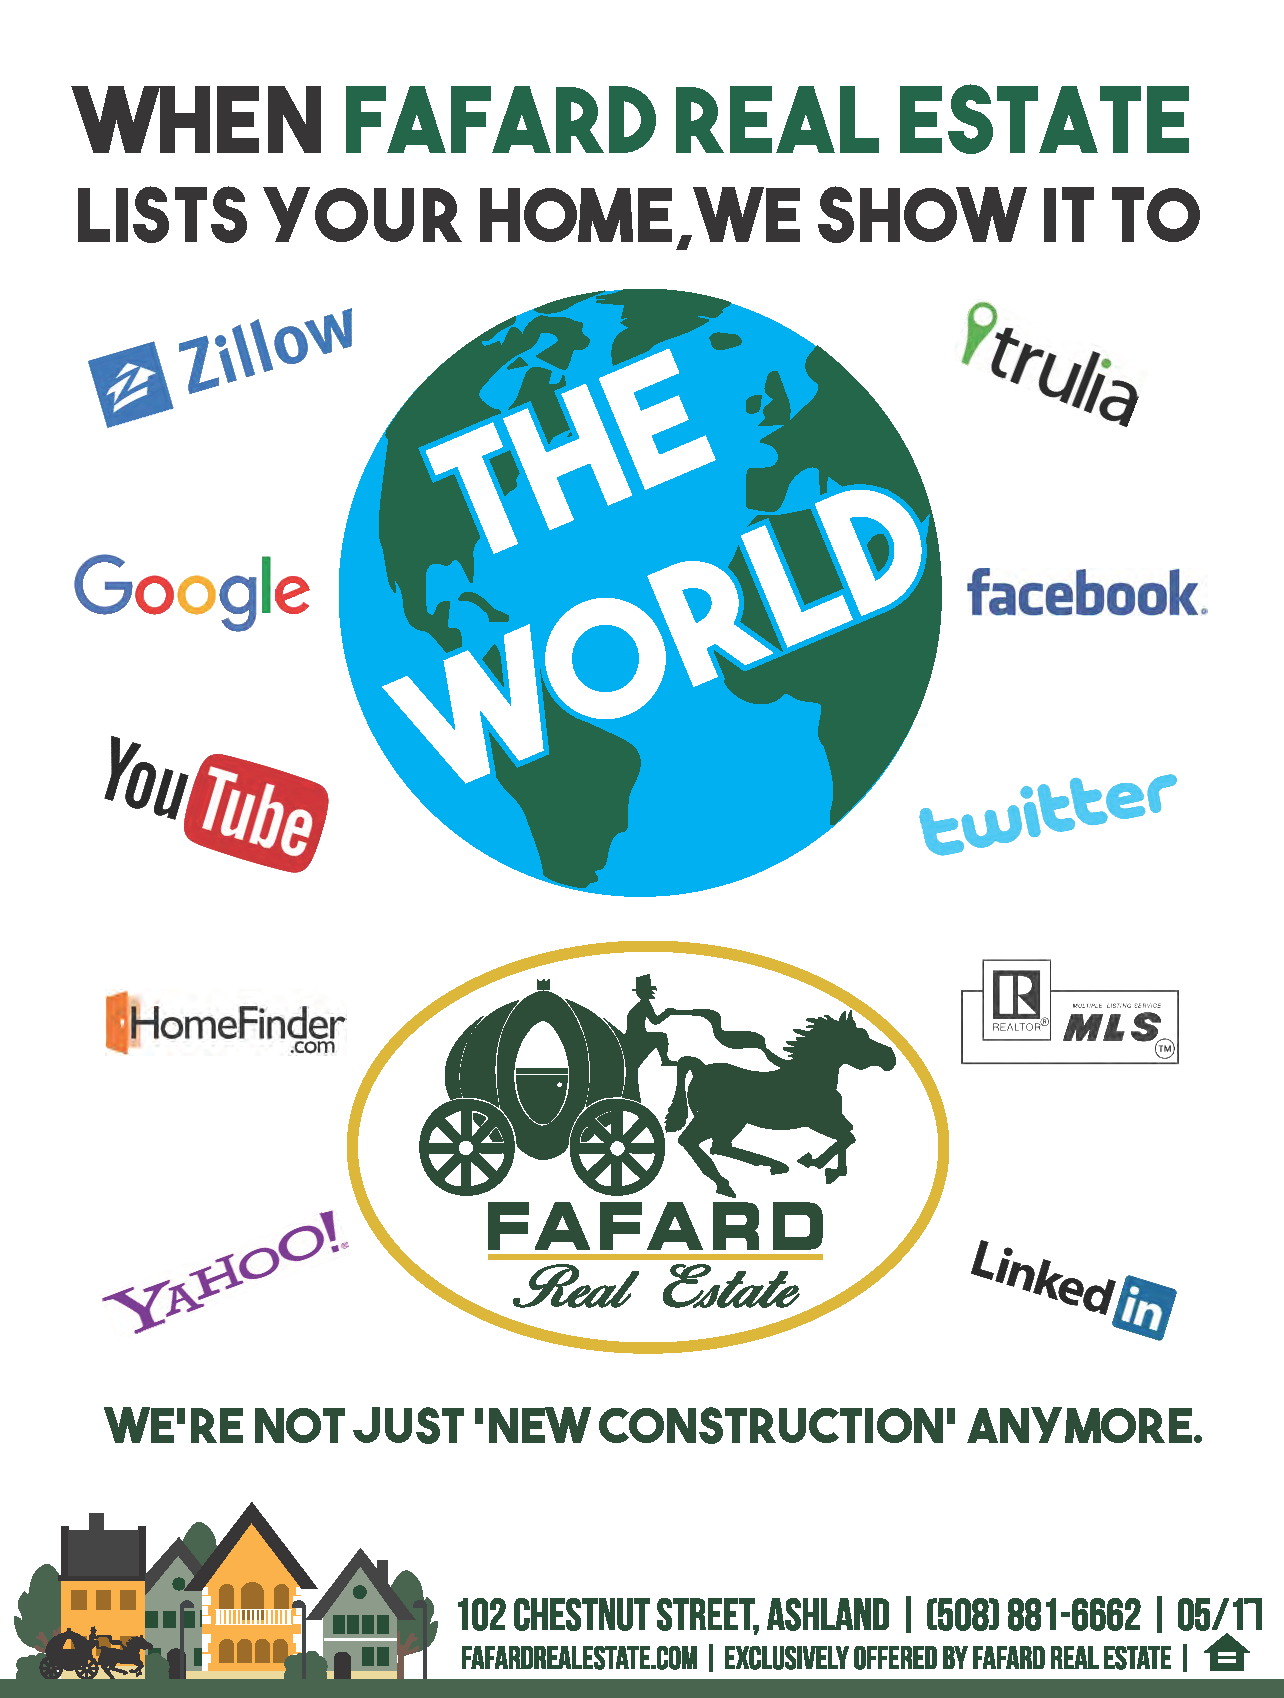 Fafard Real Estate Is Not Just “New Construction” Anymore!